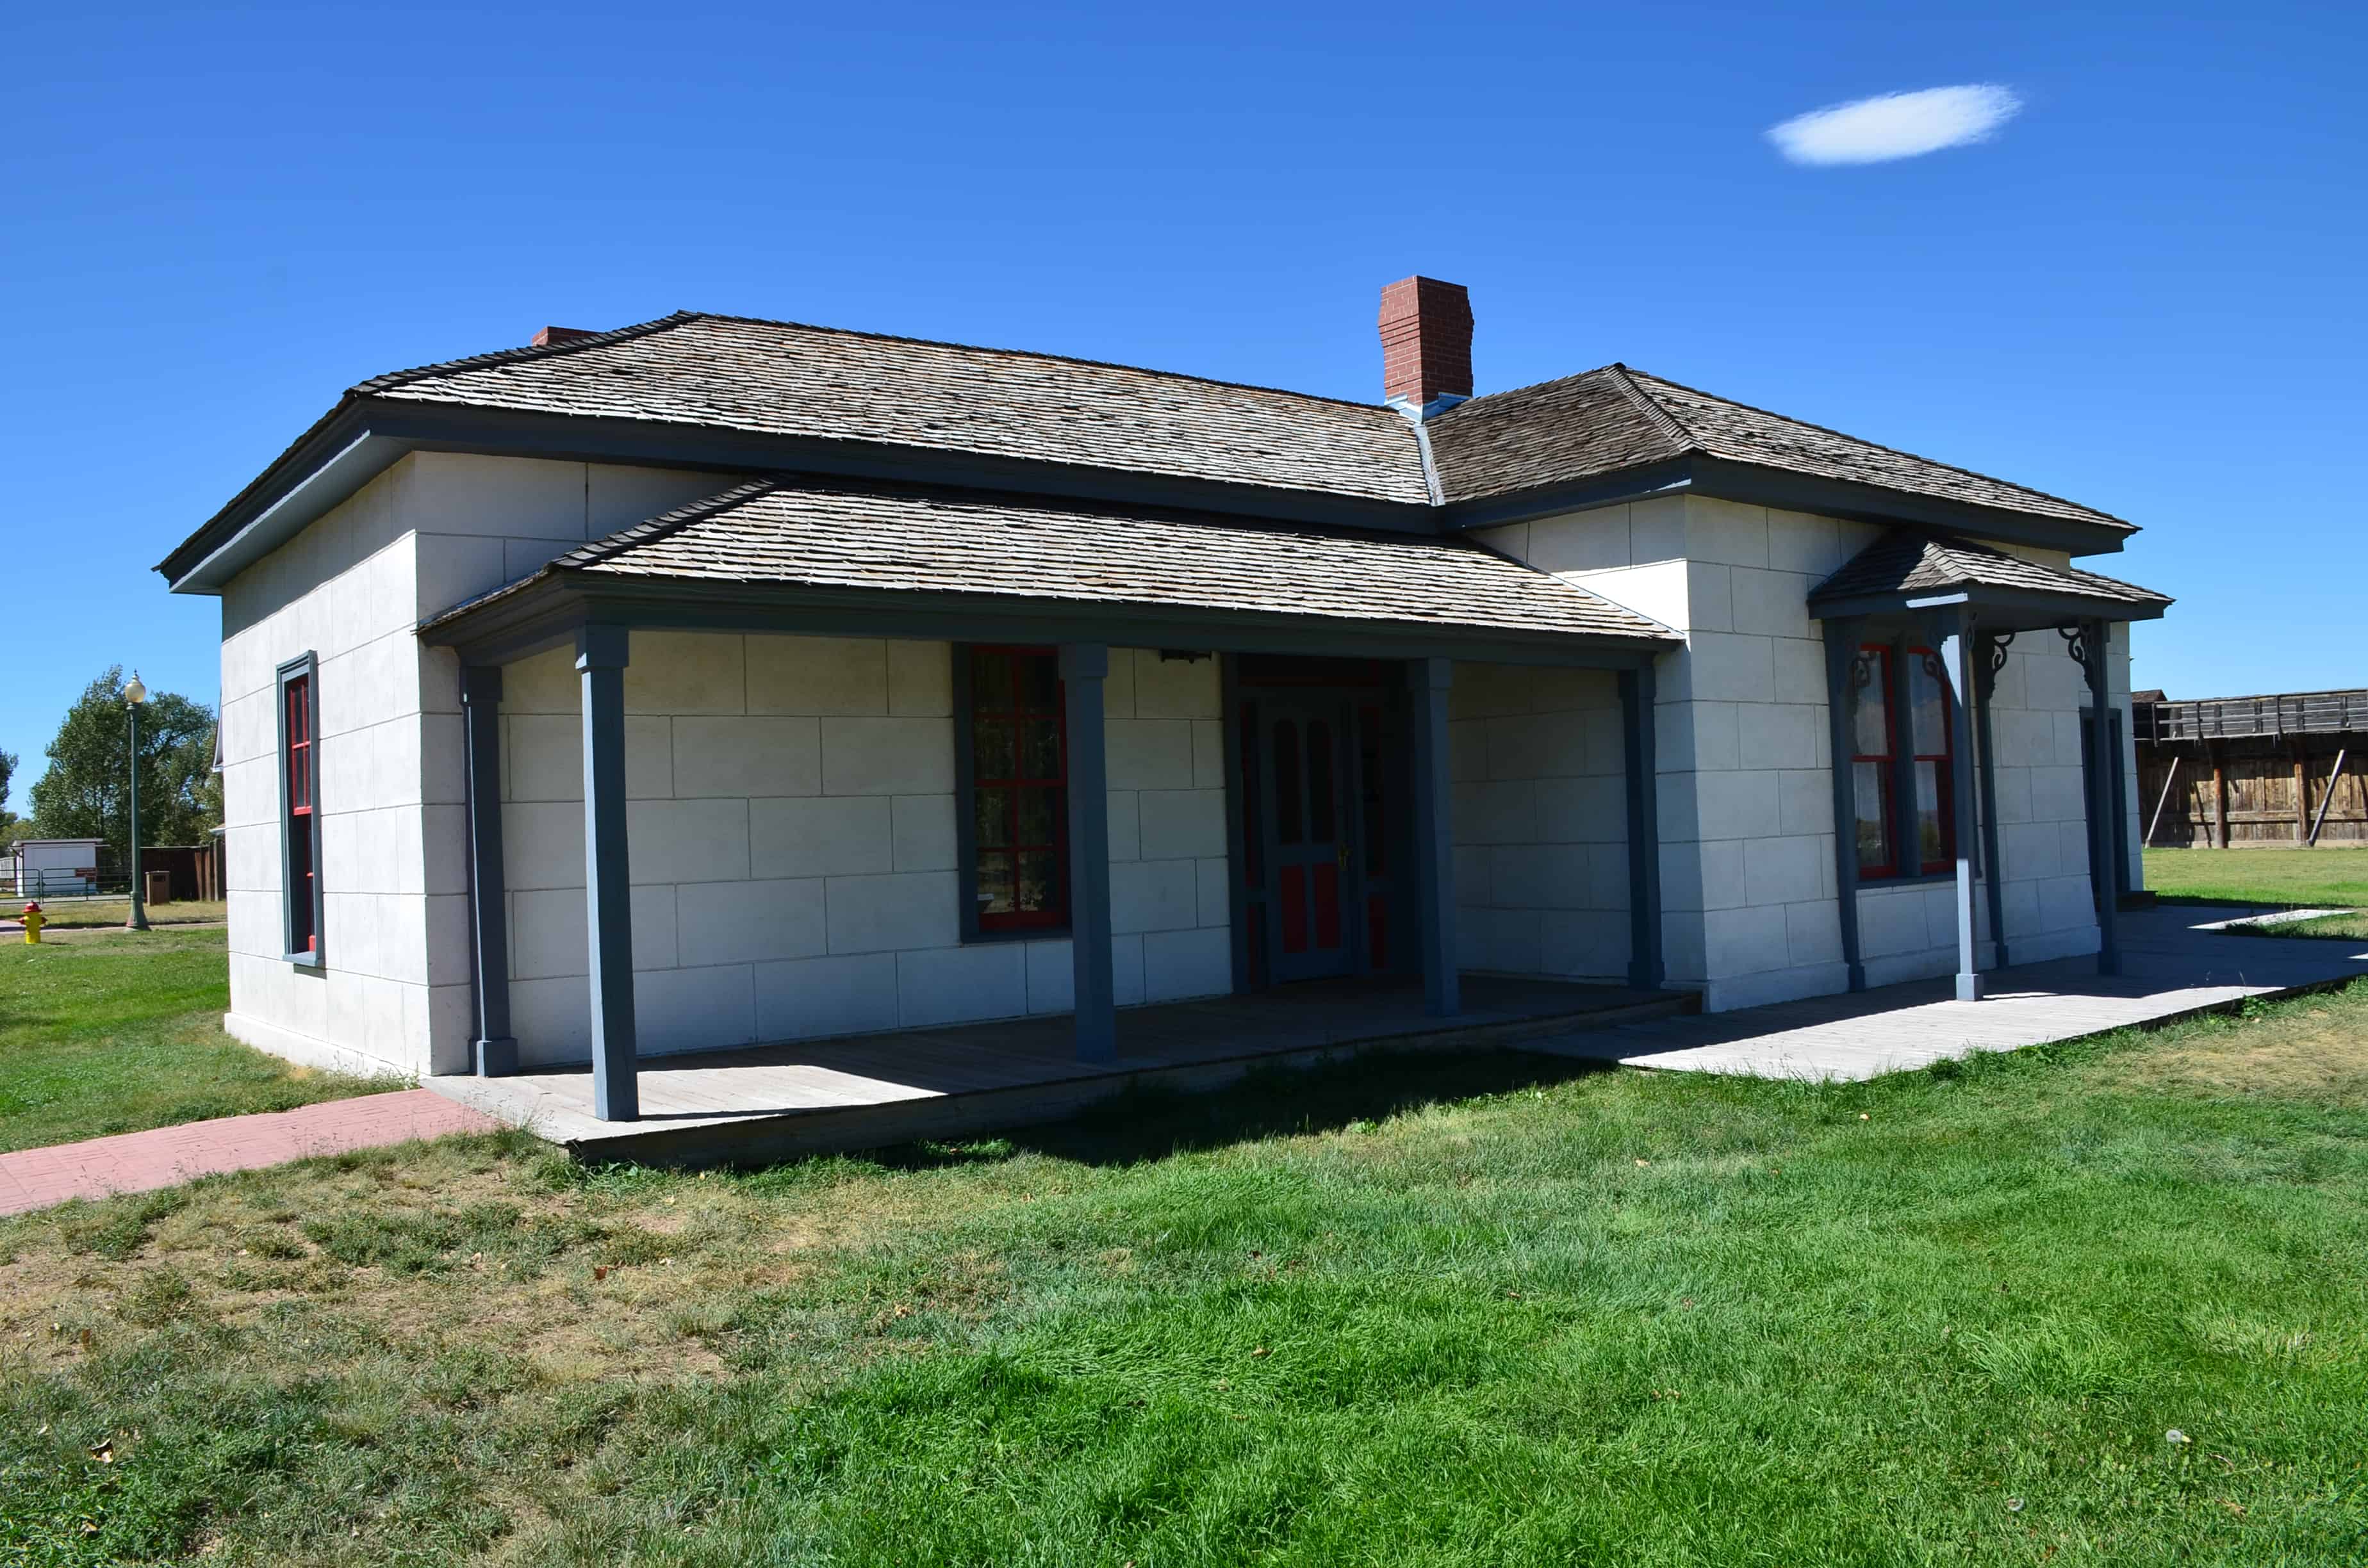 Warden's house at Wyoming Territorial Prison State Historic Site in Laramie